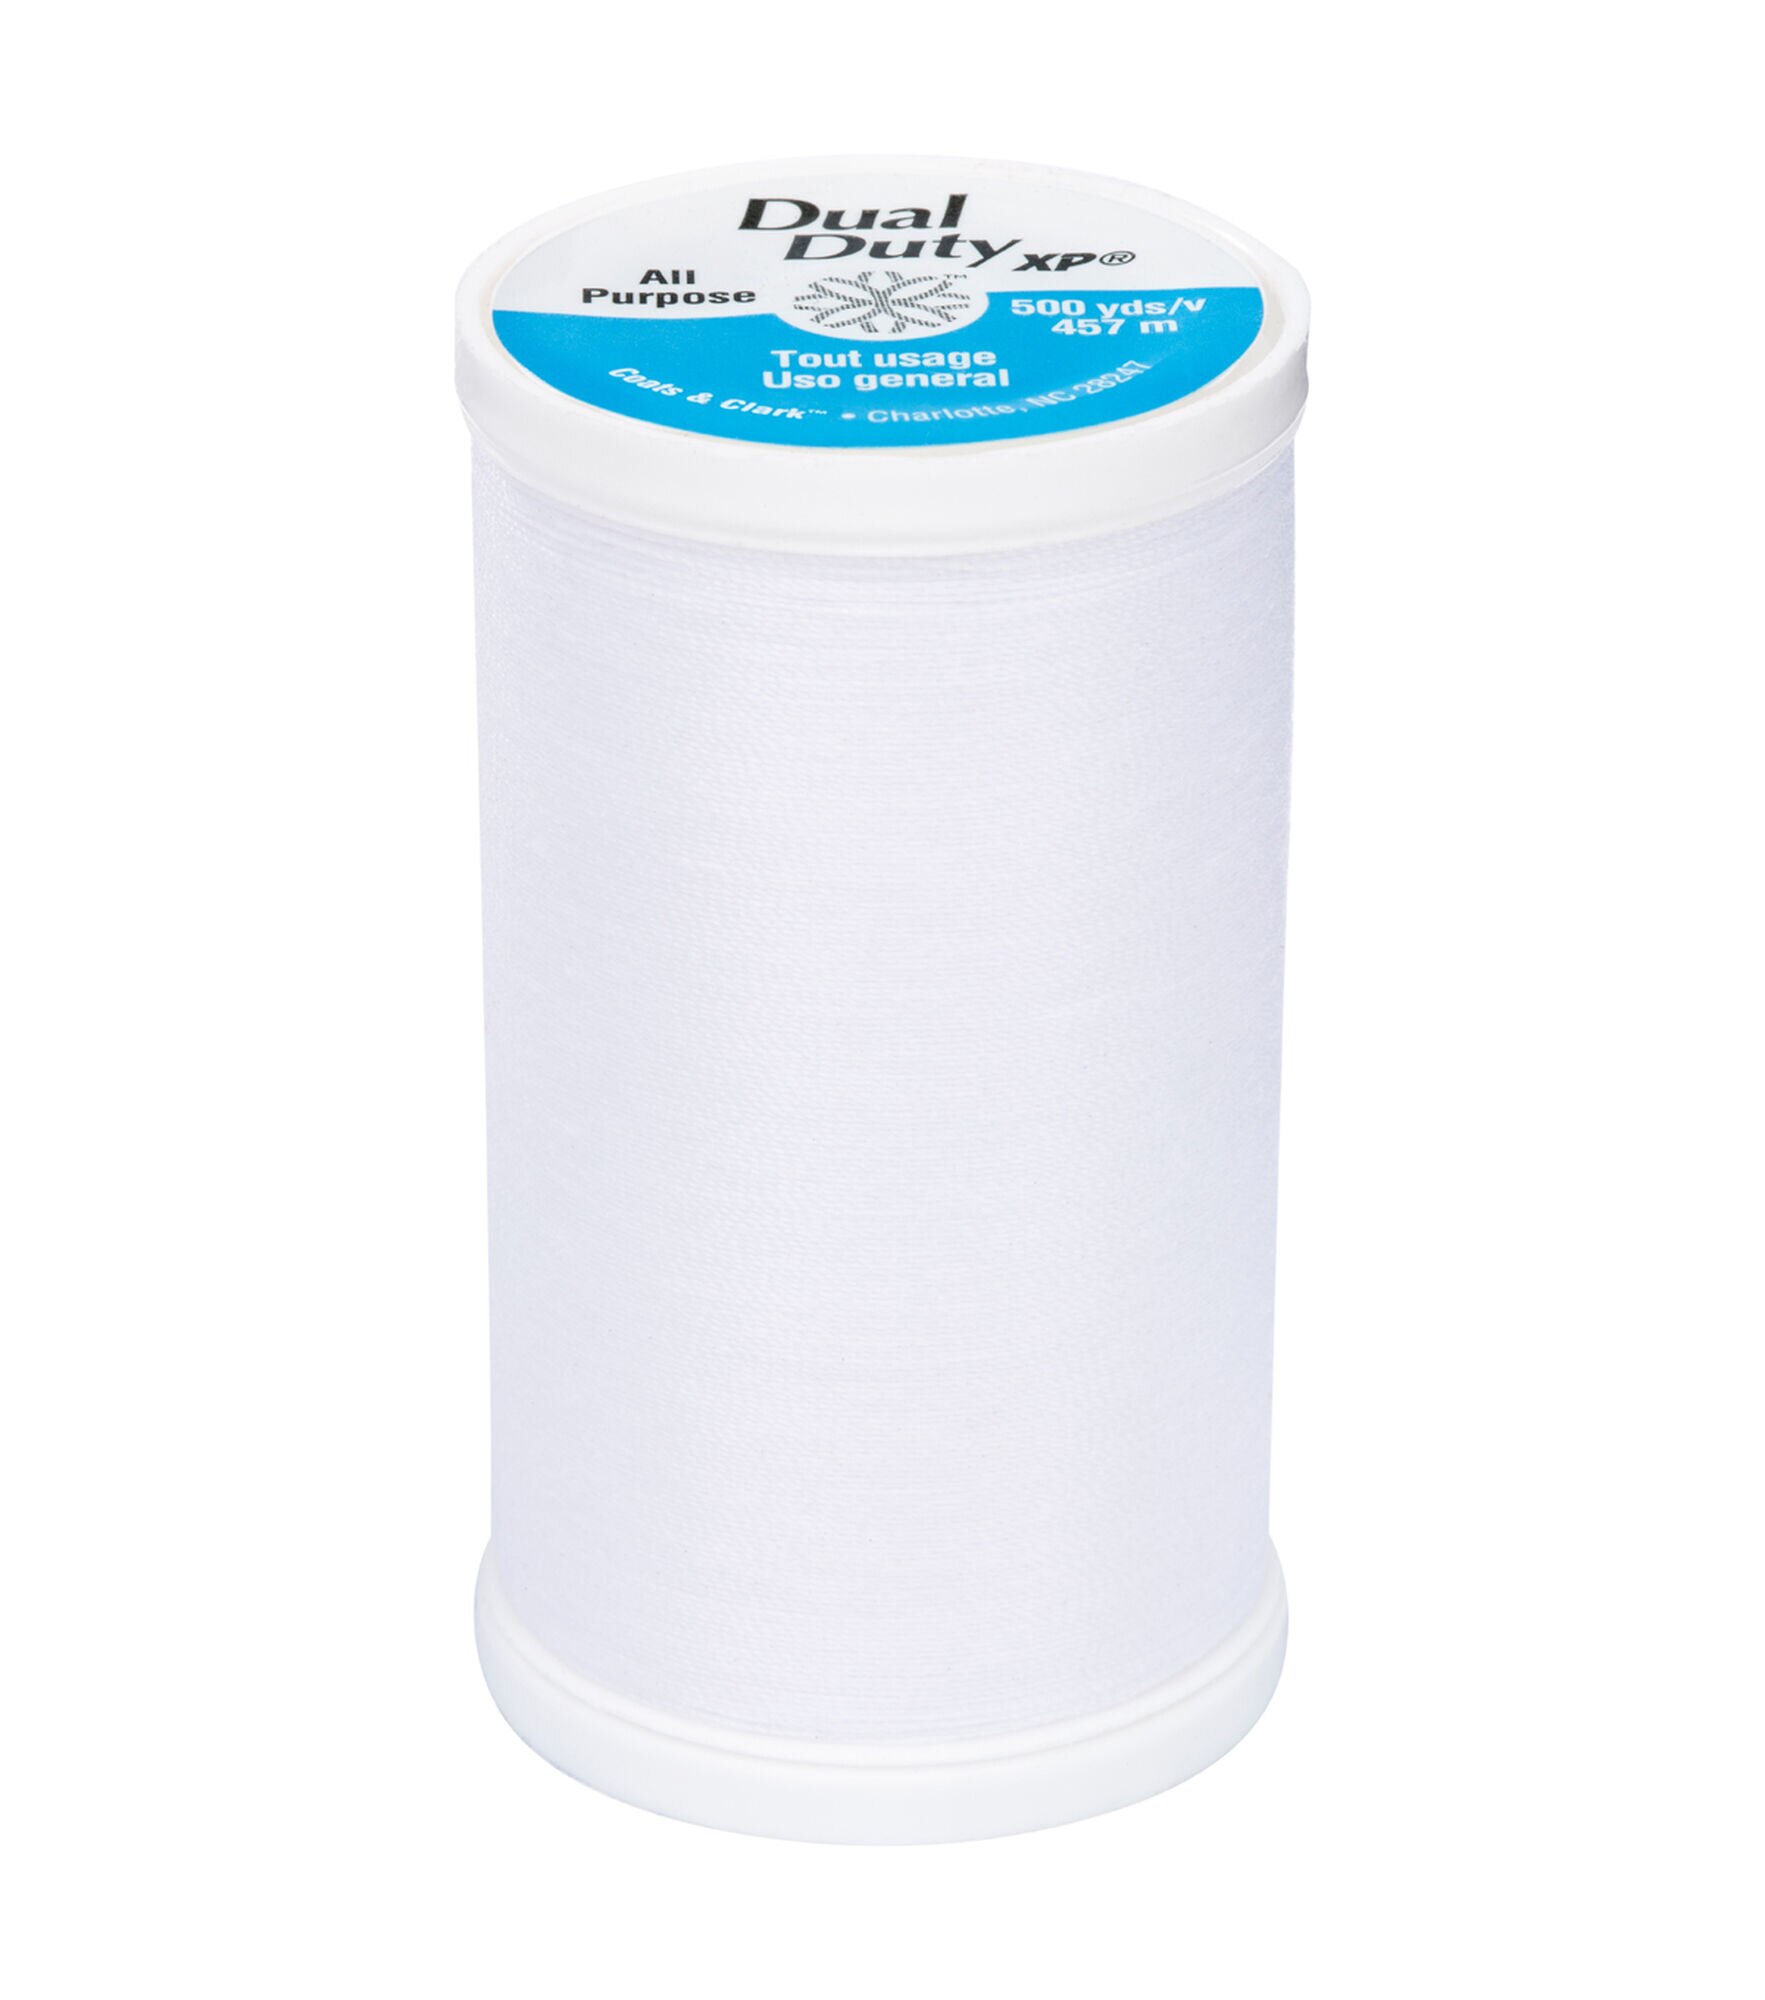 Hello Hobby Rich Green 100% Polyester All Purpose Thread, 500 Yards